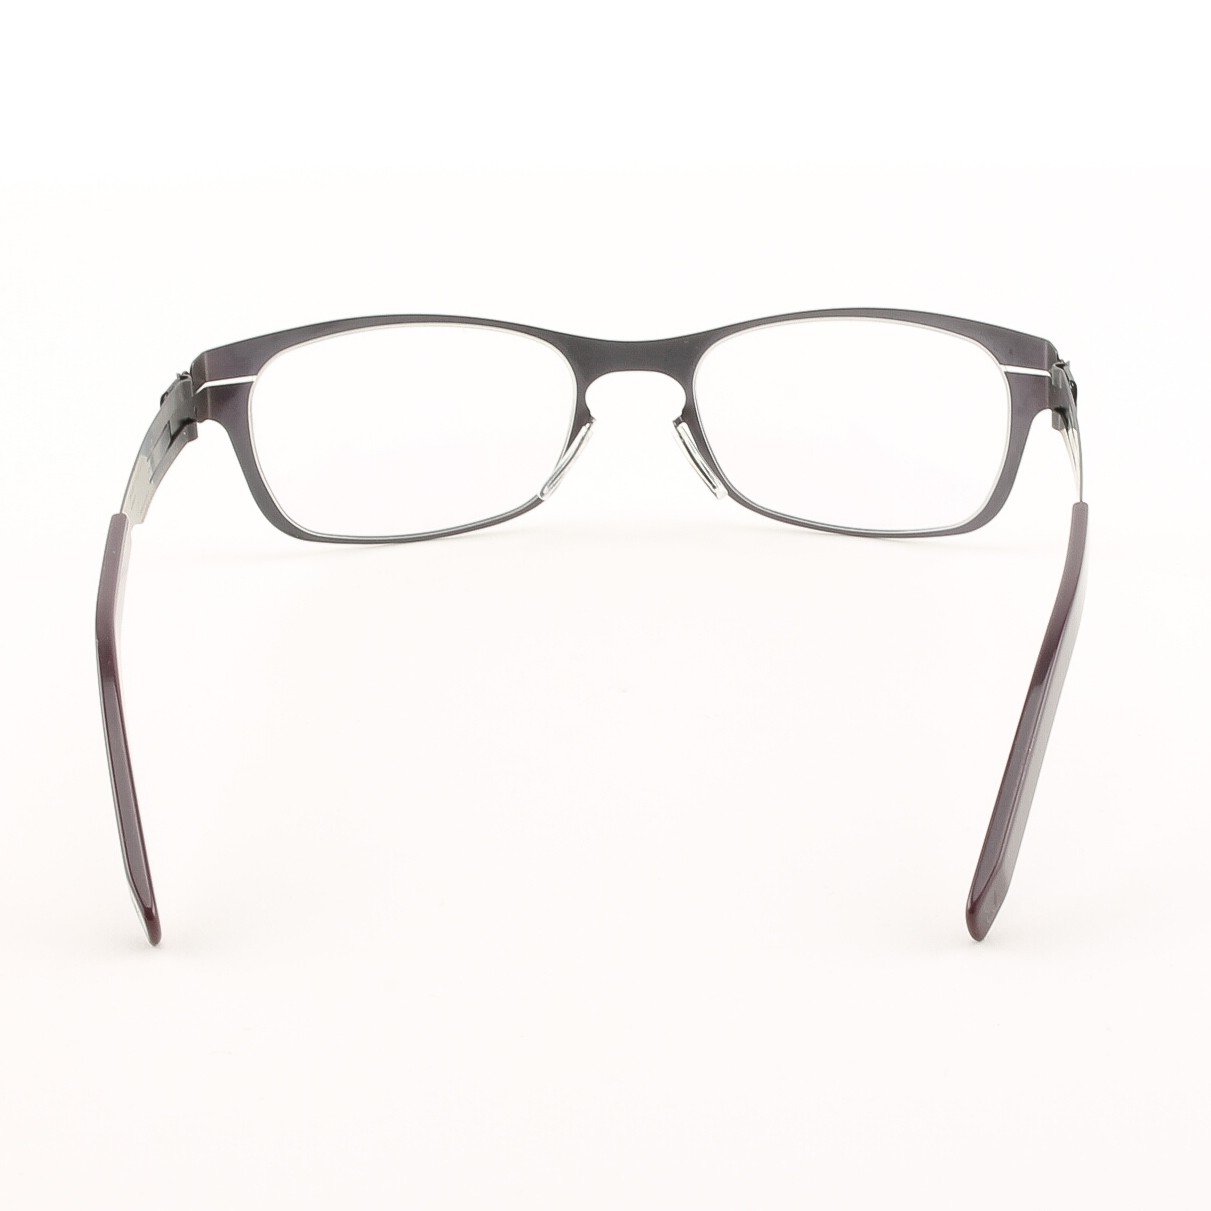 ic! Berlin Charmante Aubergine Eyeglasses Col. Nickle with Clear Lenses